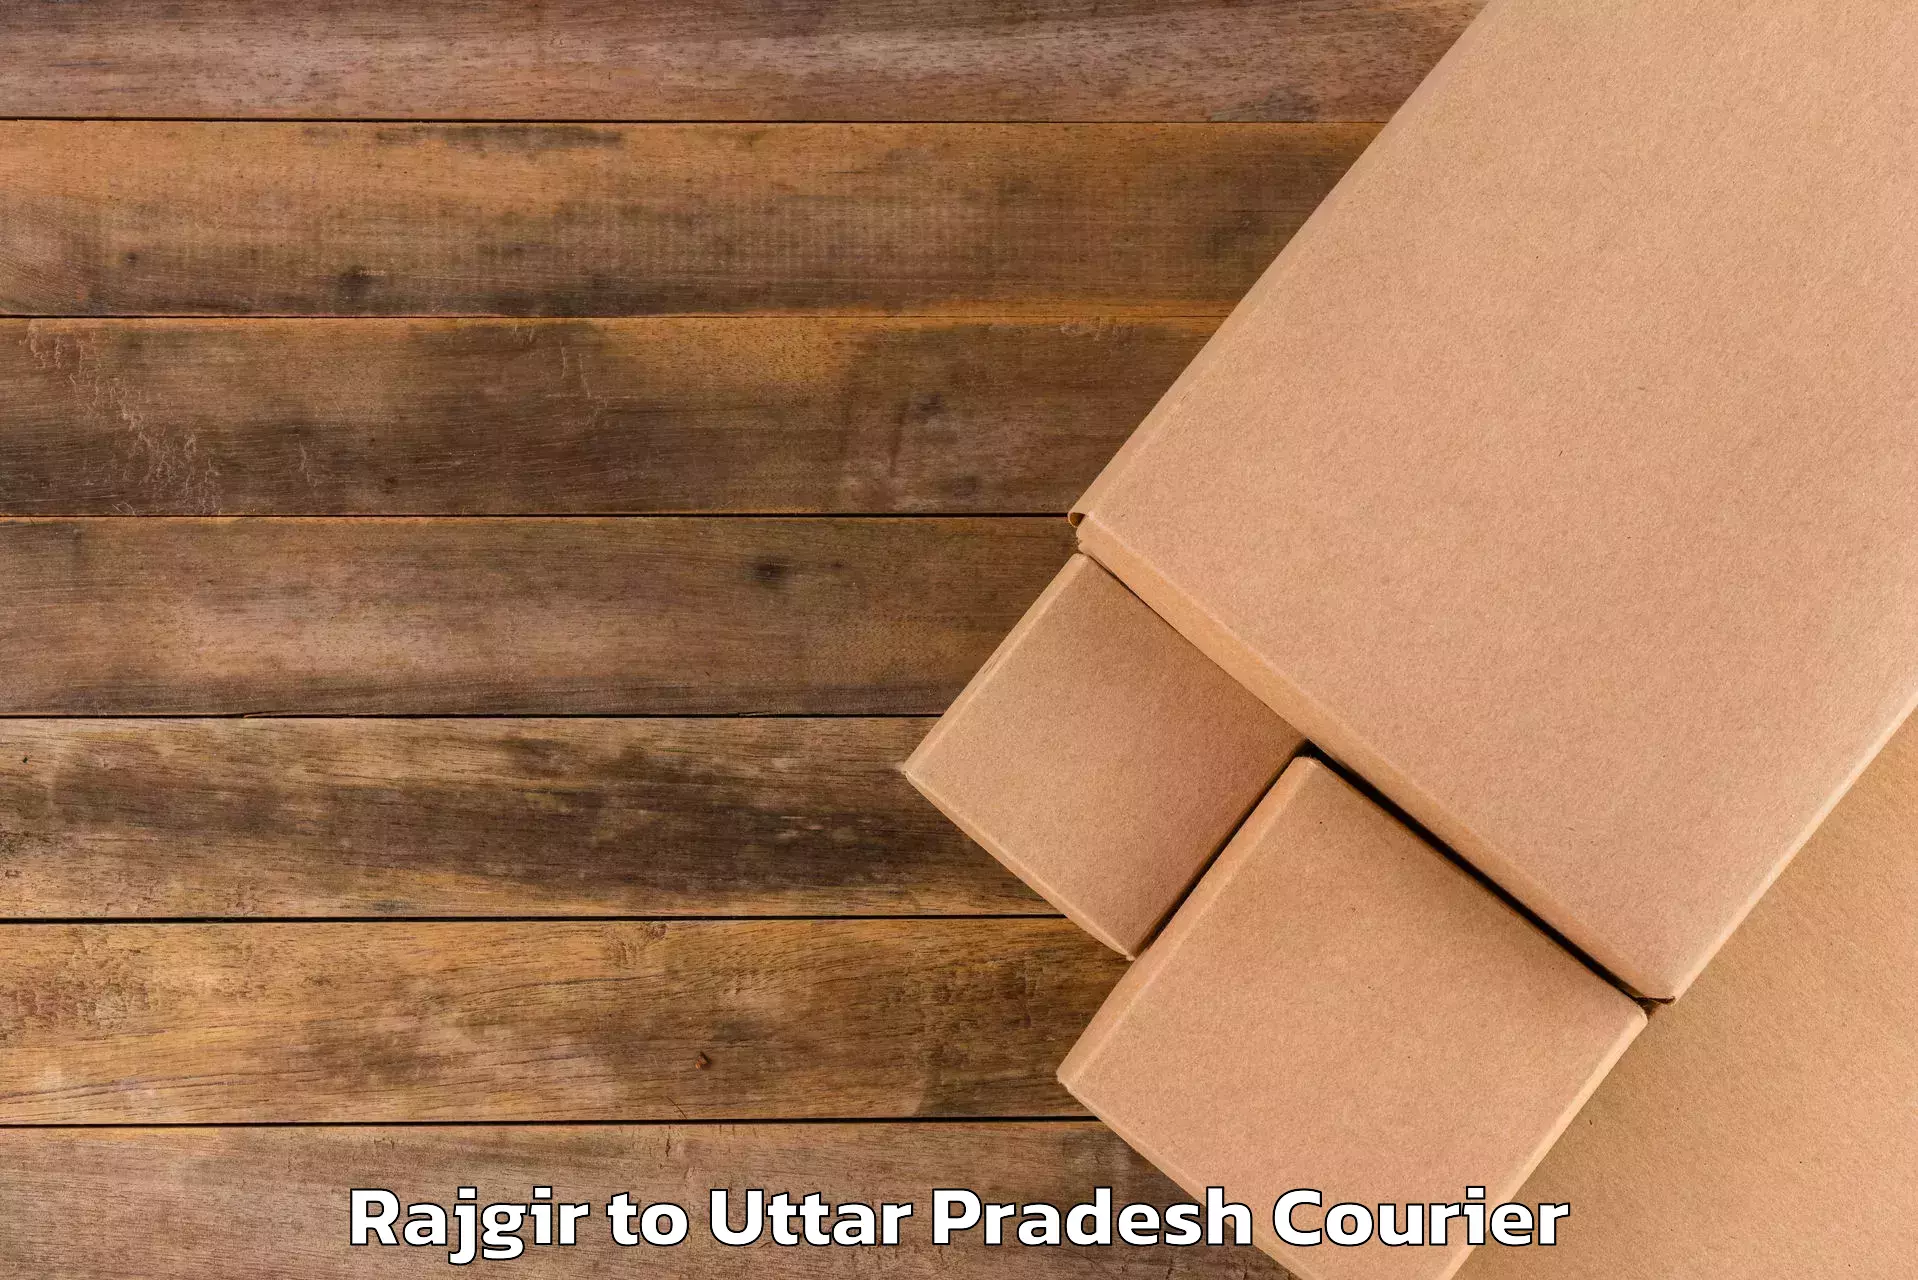 Luggage shipping estimate in Rajgir to Lucknow